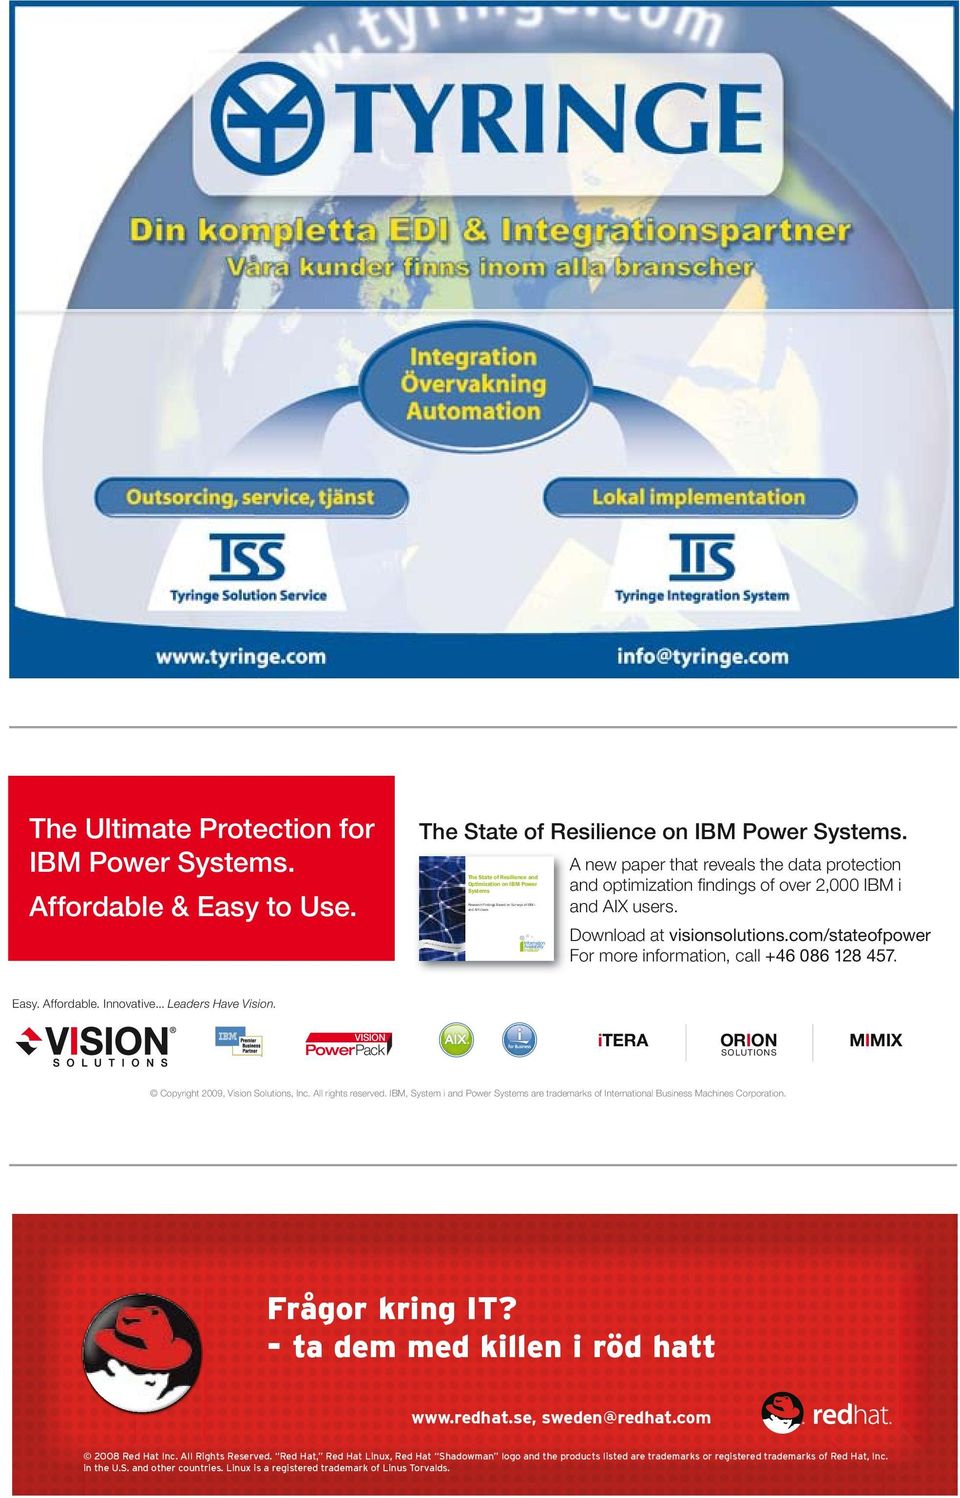 optimization findings of over 2,000 IBM i and AIX users. Download at visionsolutions.com/stateofpower For more information, call +46 086 128 457. Easy. Affordable. Innovative... Leaders Have Vision.